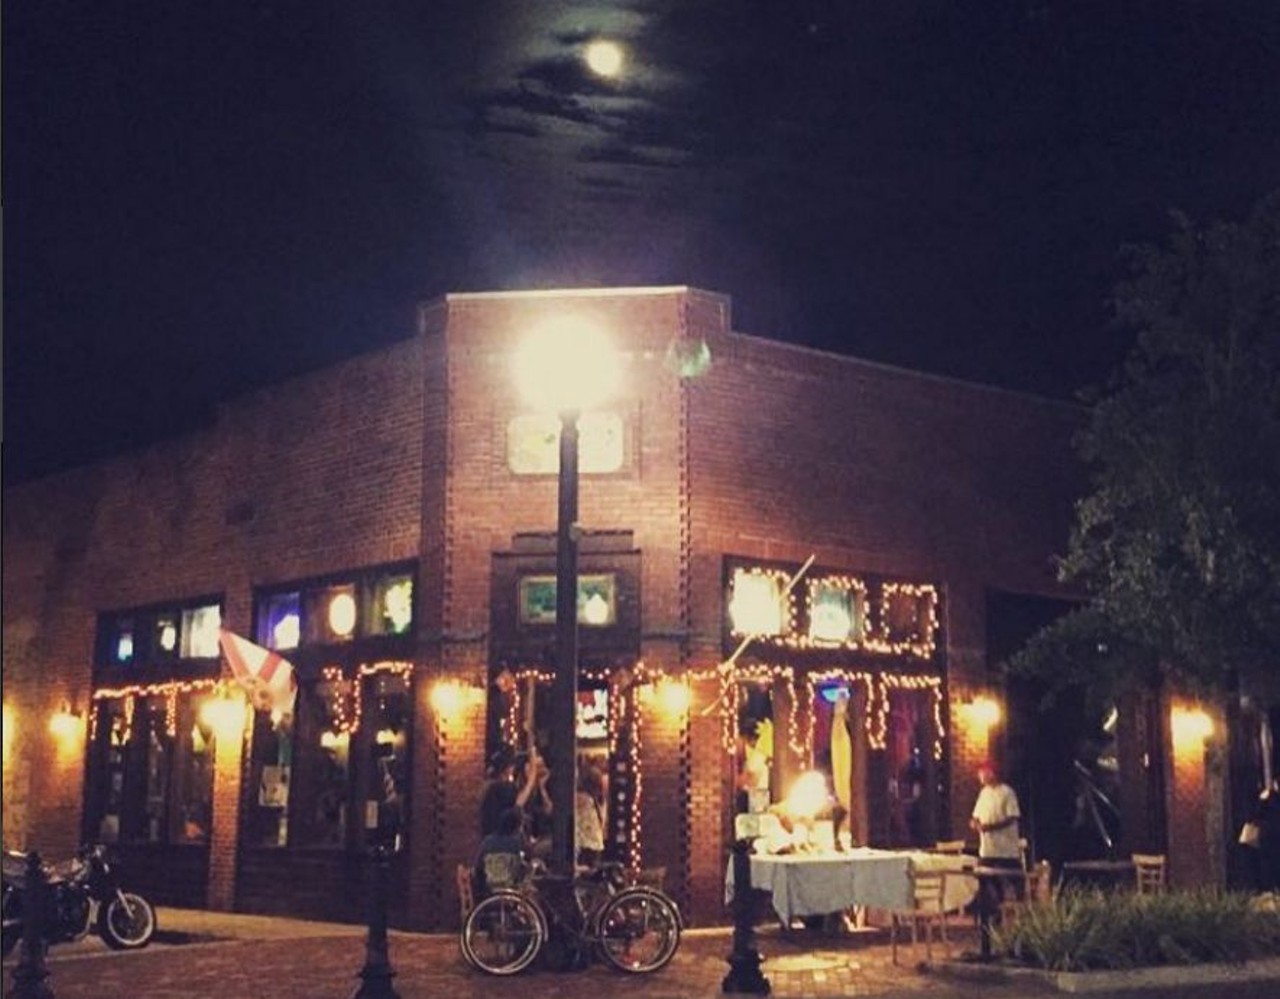 Saturday, June 24
Sanford After Dark&nbsp;Monthly street market with music, art, vendors, food and drink and more. Fourth Saturday of every month, 8 pm;&nbsp;Little Fish Huge Pond, 401 S. Sanford Ave., Sanford; free; 407-221-1499.
Photo via sandfordthegreat/ Instagram